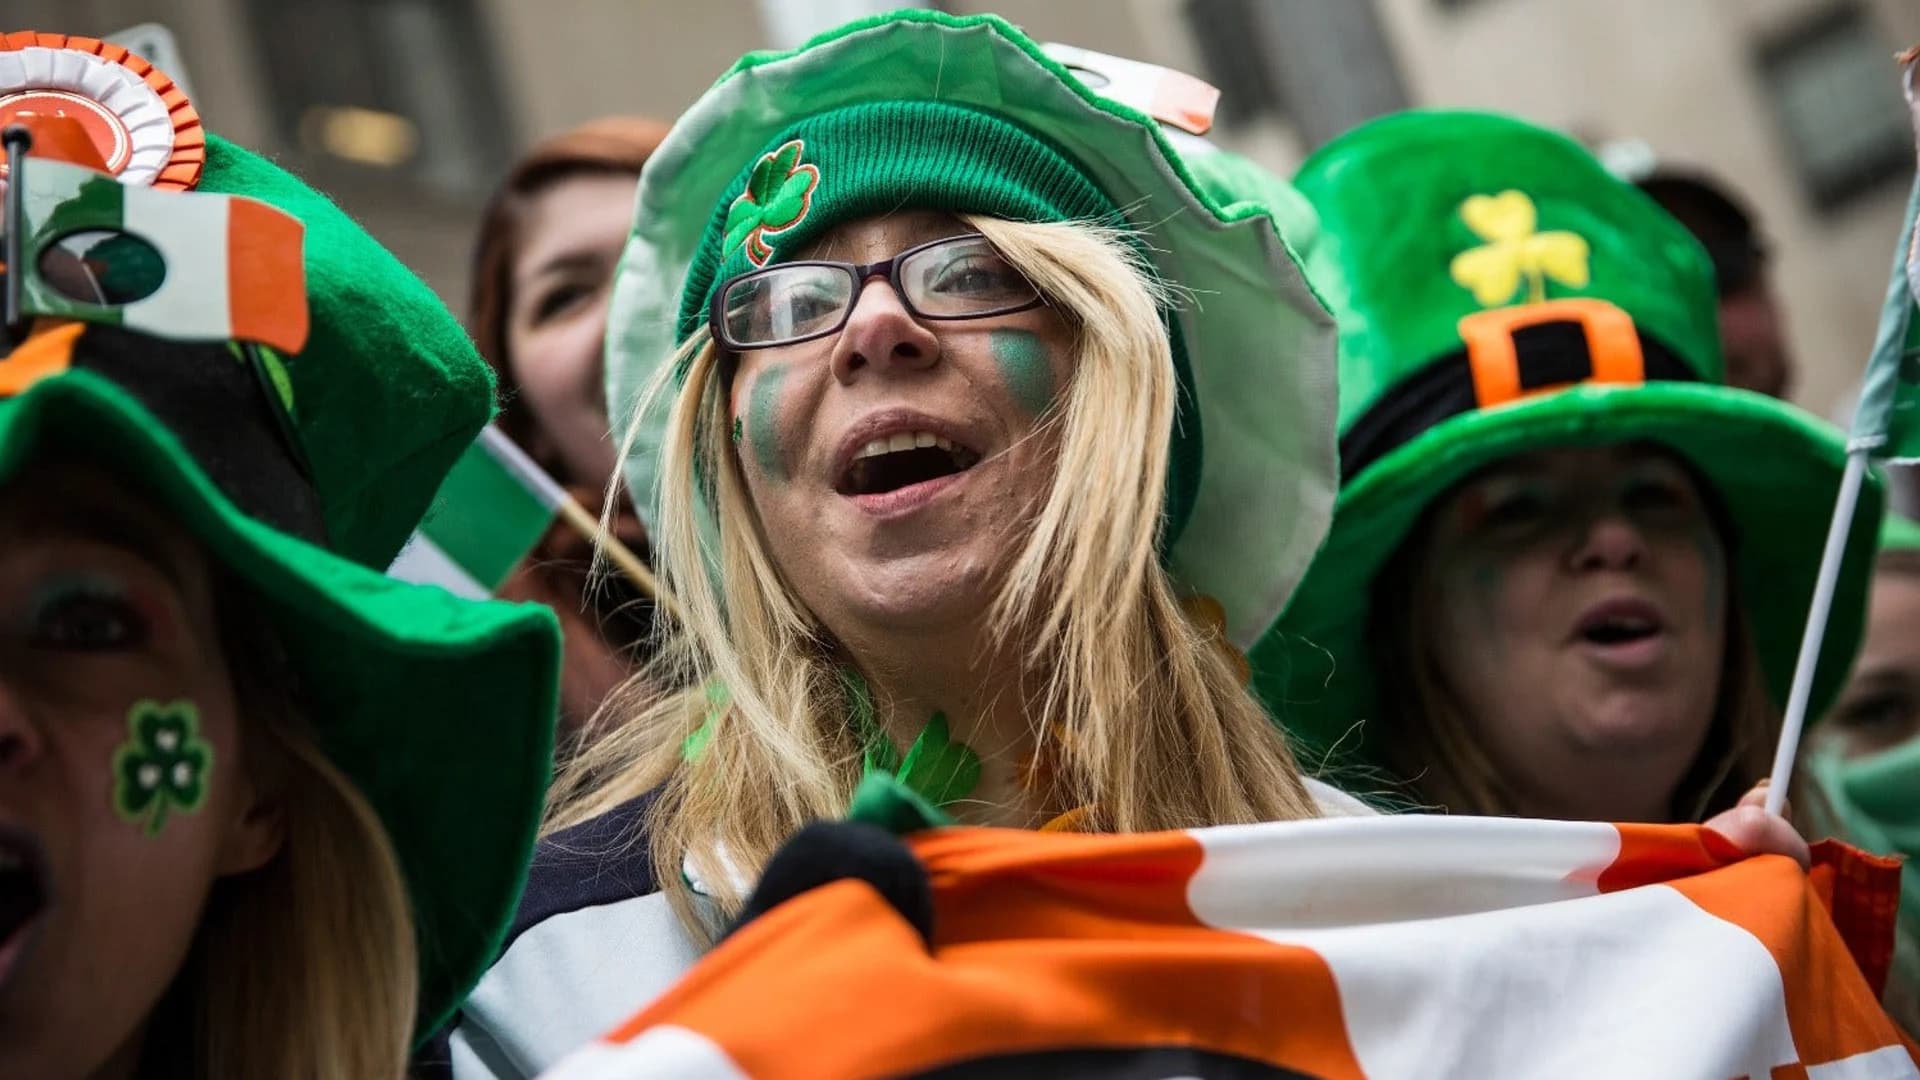 Your St. Patrick's Day Photos